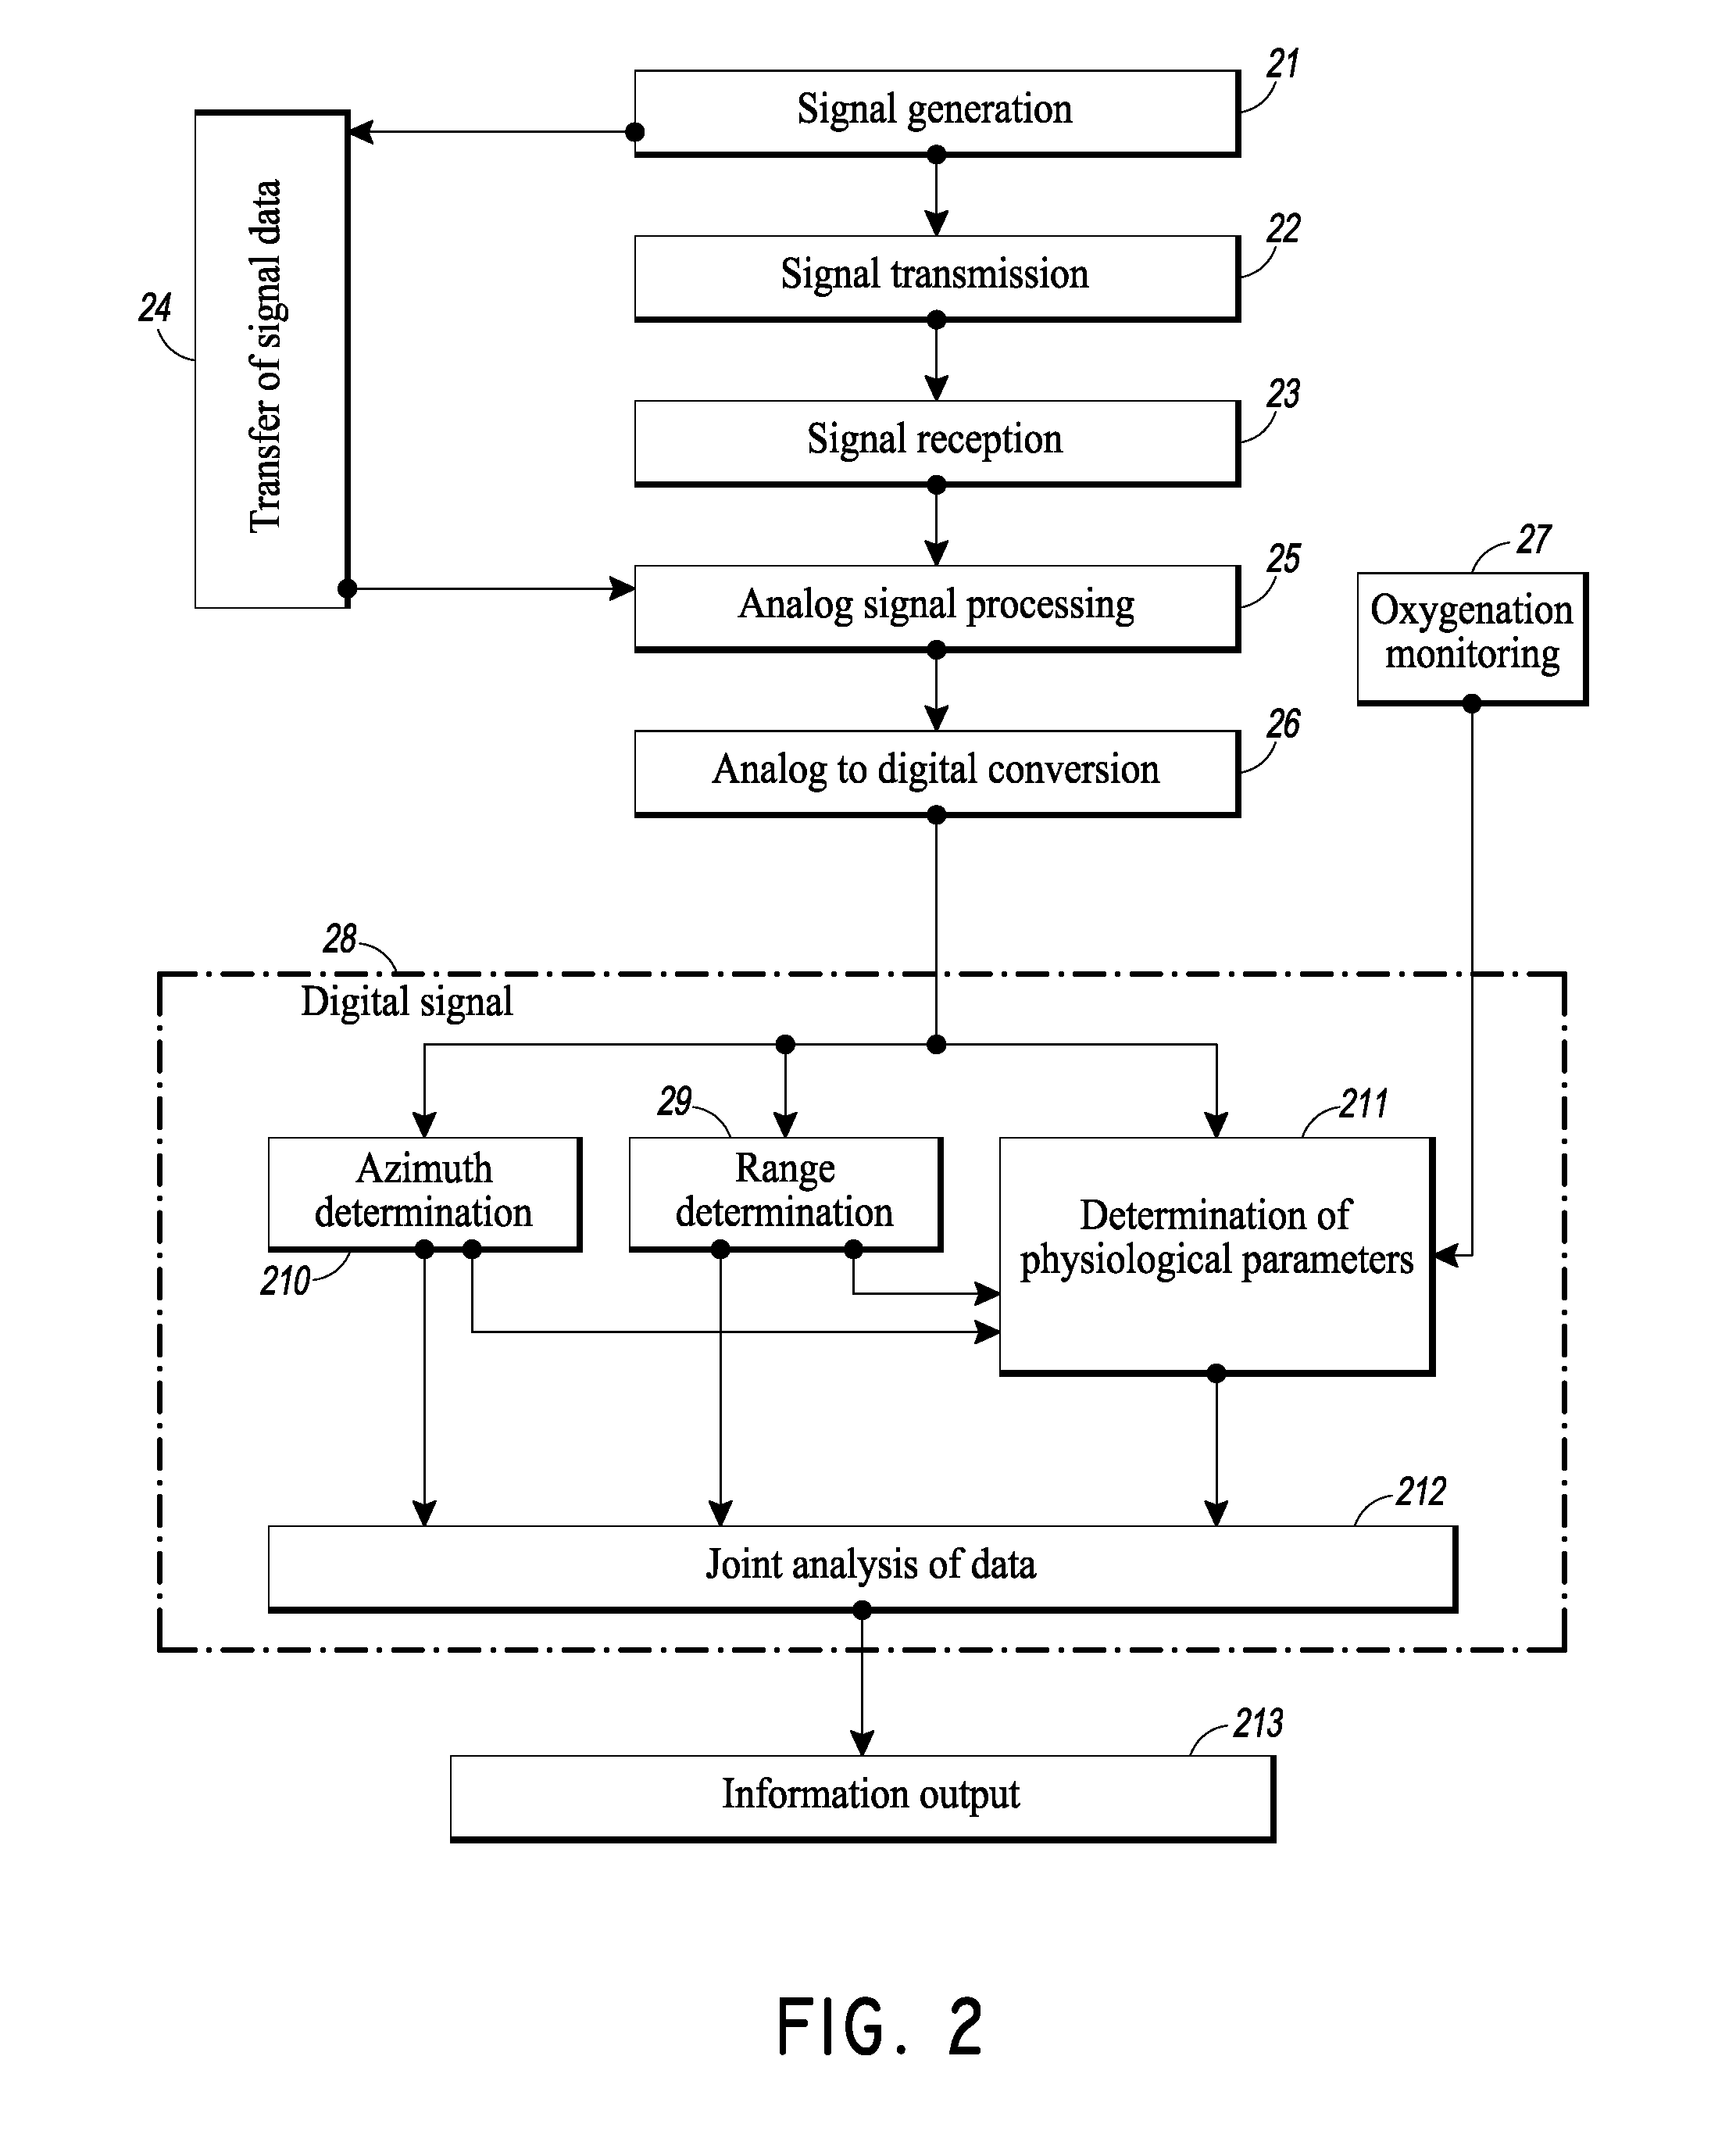 Apparatus and methods for remote monitoring of physiological parameters